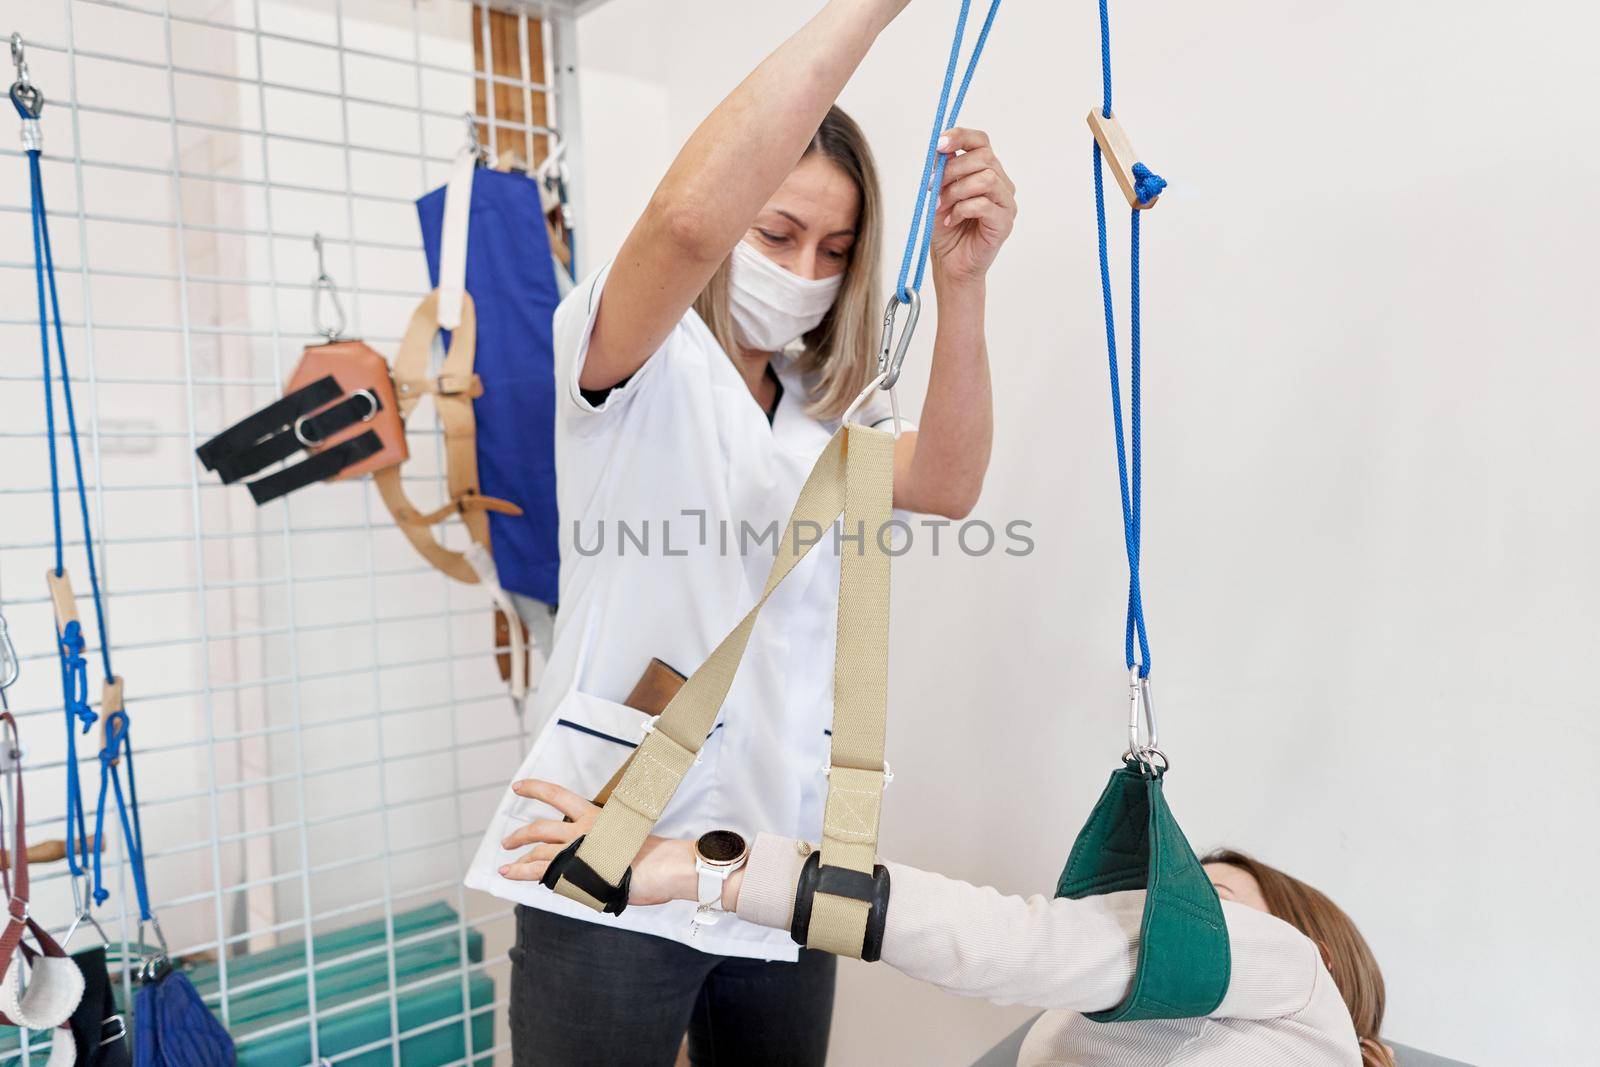 Physiotherapist using a sling to immobilize an arm during rehabilitation therapy with a patient